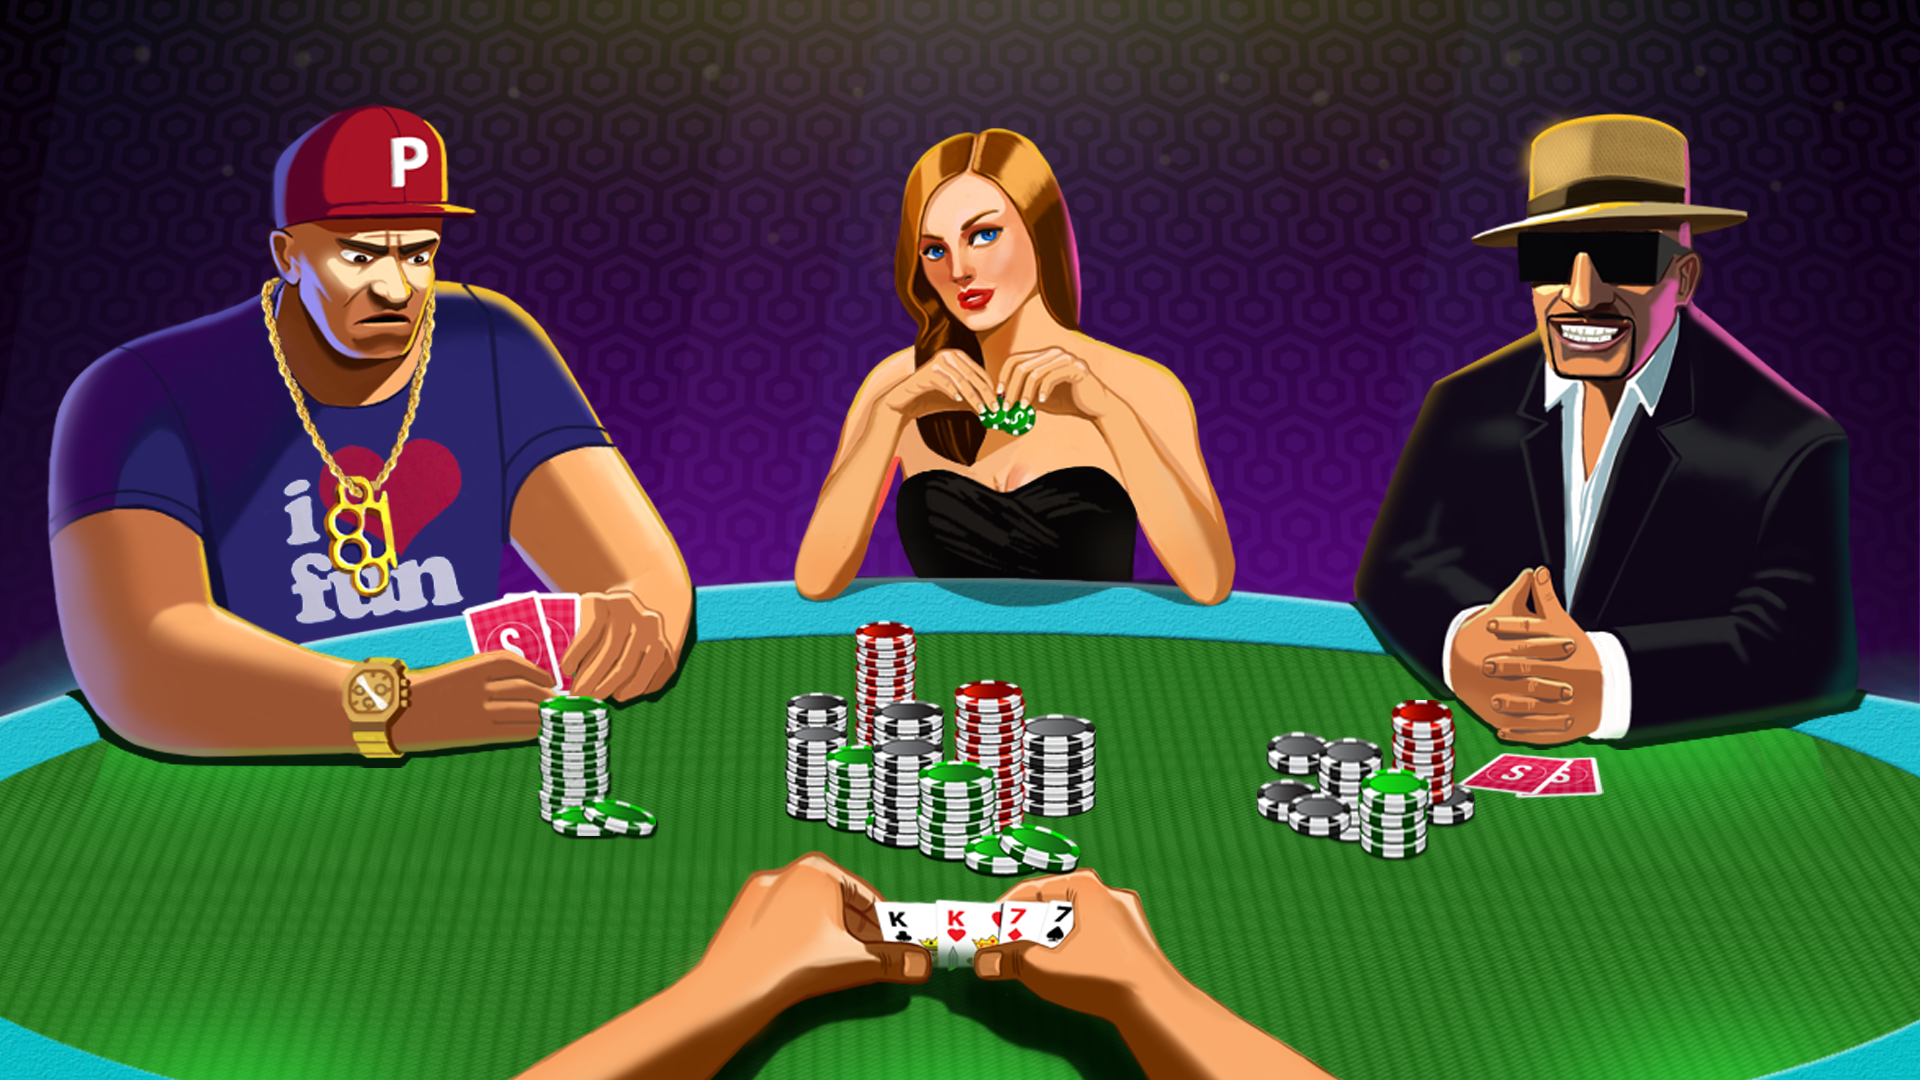 Poker online and Fun Factor